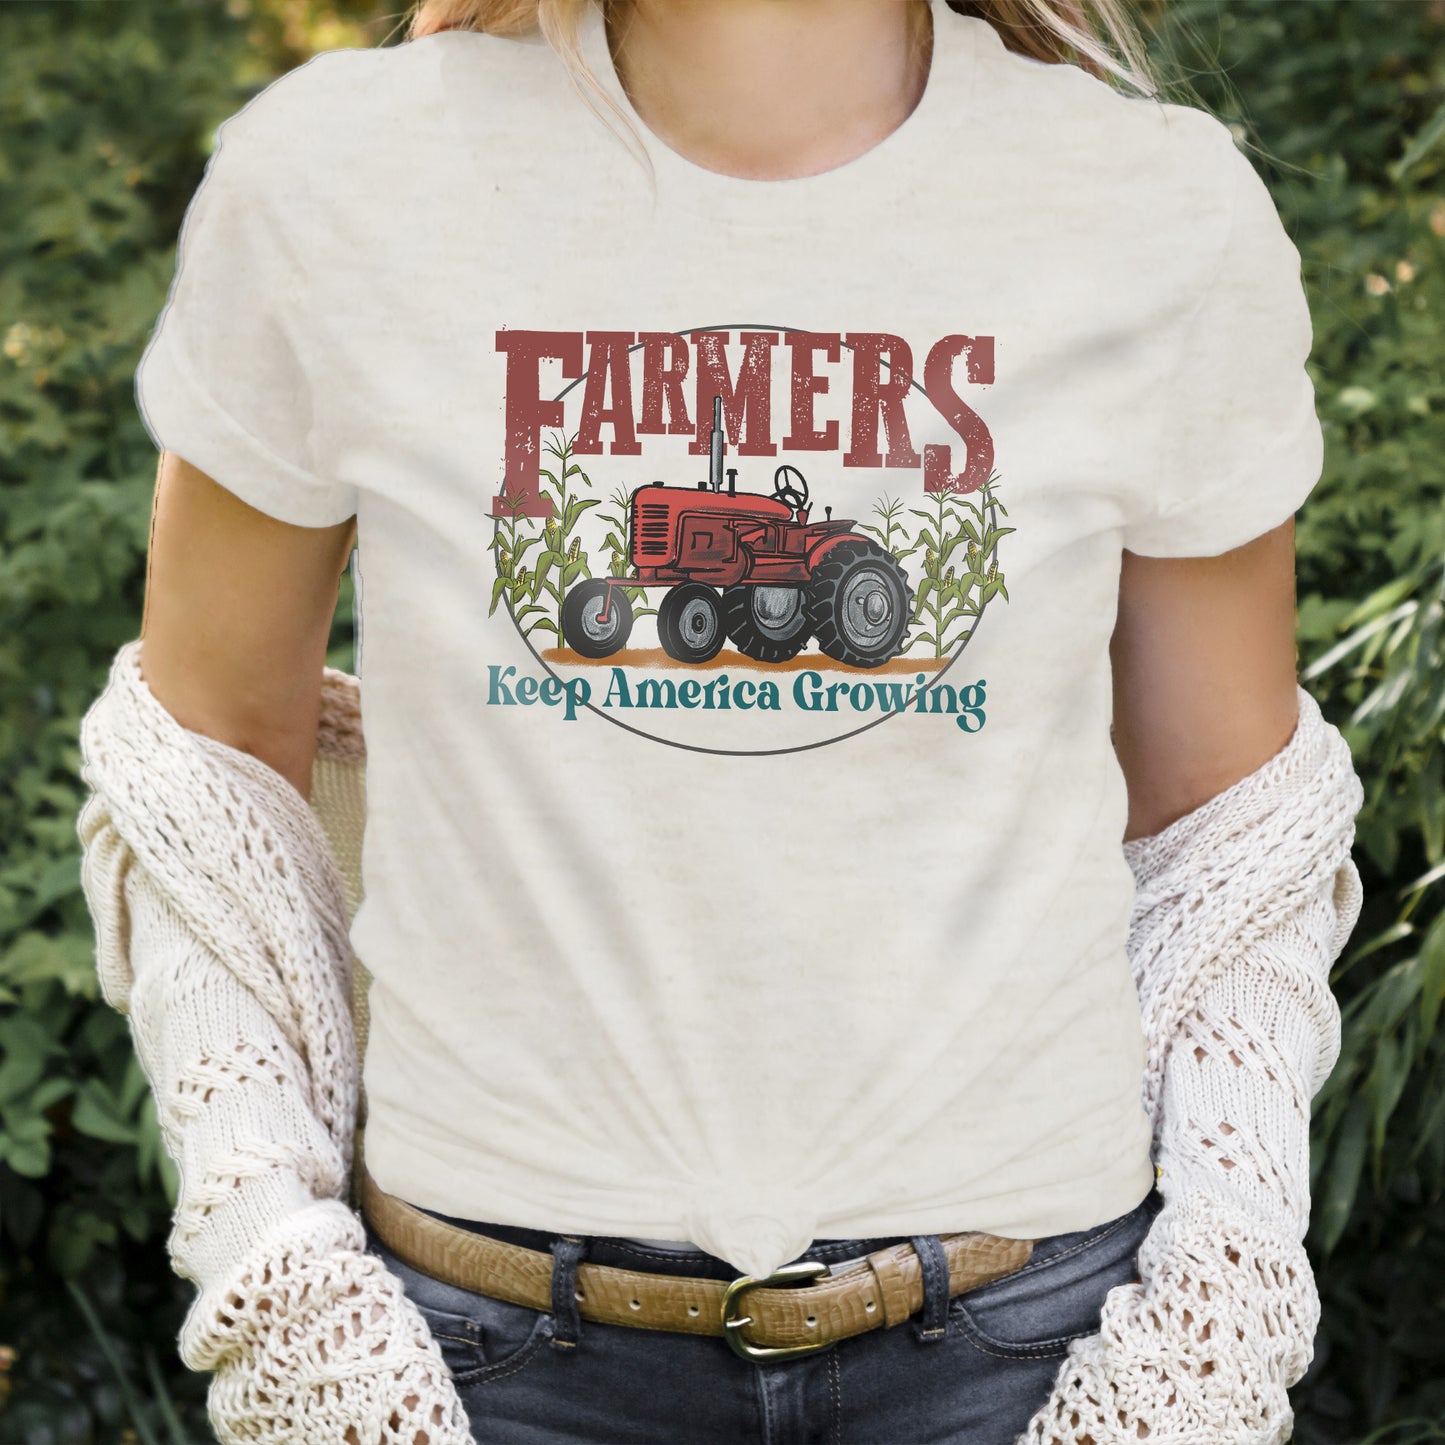 ADULT "Farmers Keep America Growing" Beige T-shirt with Red Tractor